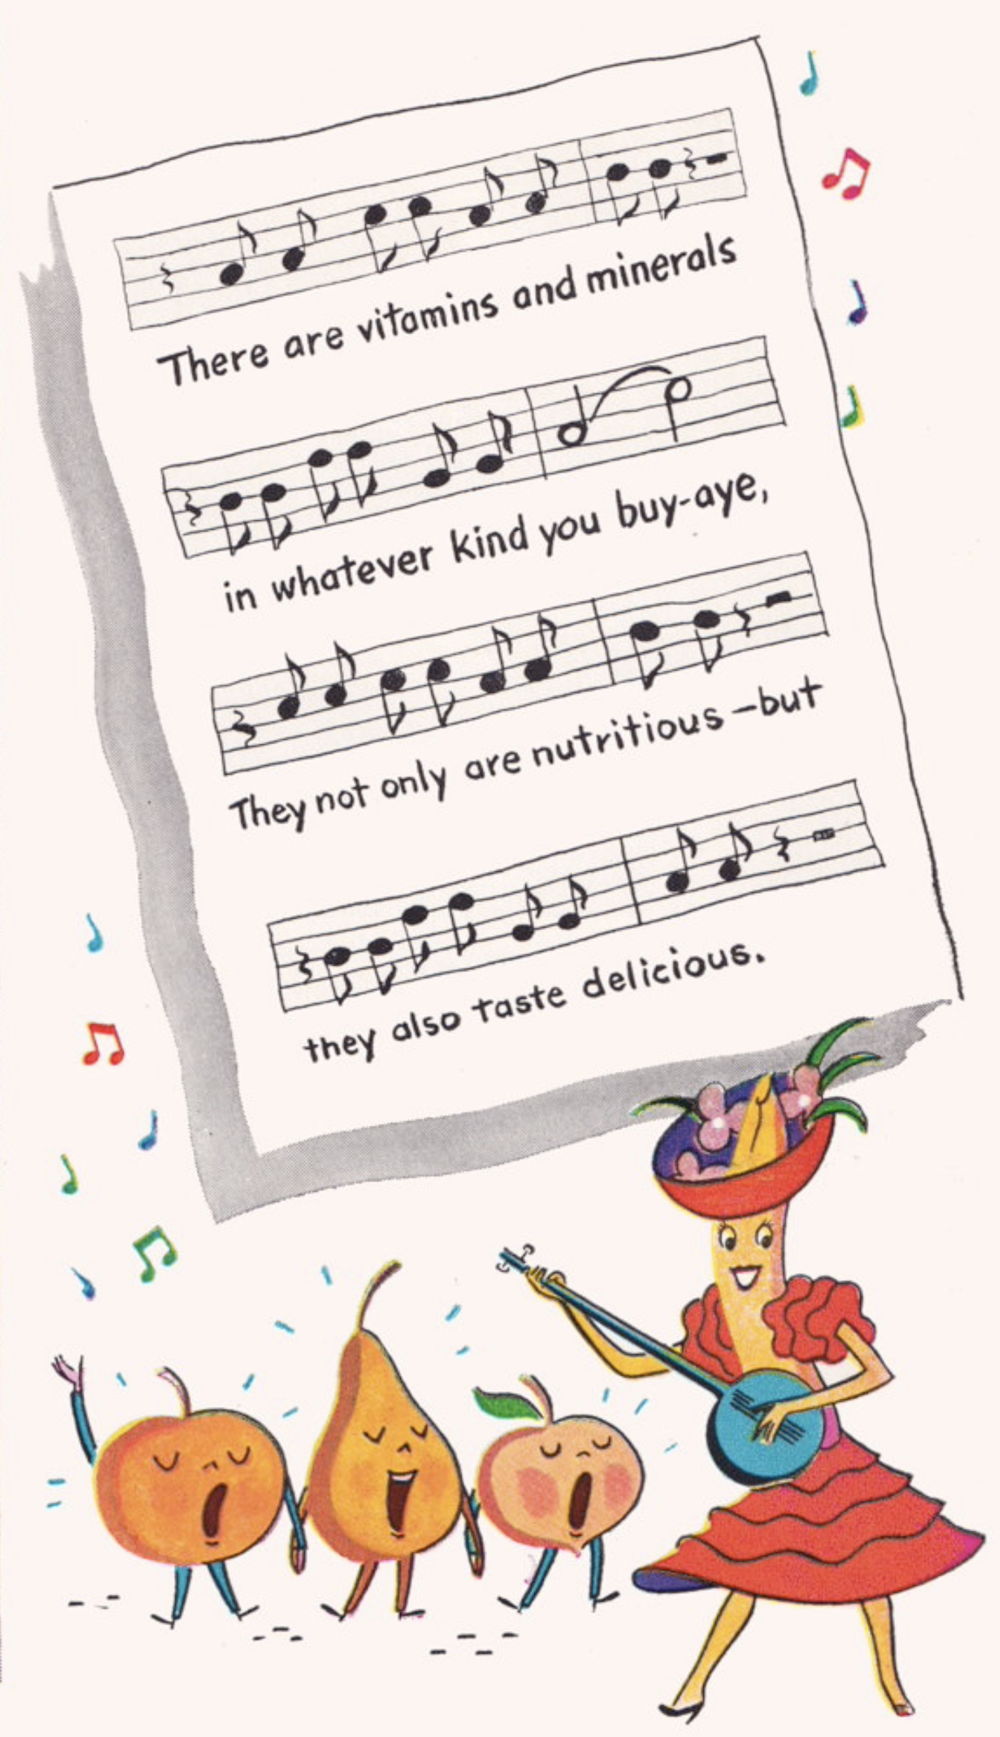 Chiquita Banana Song: “There are vitamins and minerals in whatever kind you buy-aye,/They not only are nutritious—but they also taste delicious.”; bananas; food history; vintage cookbooks